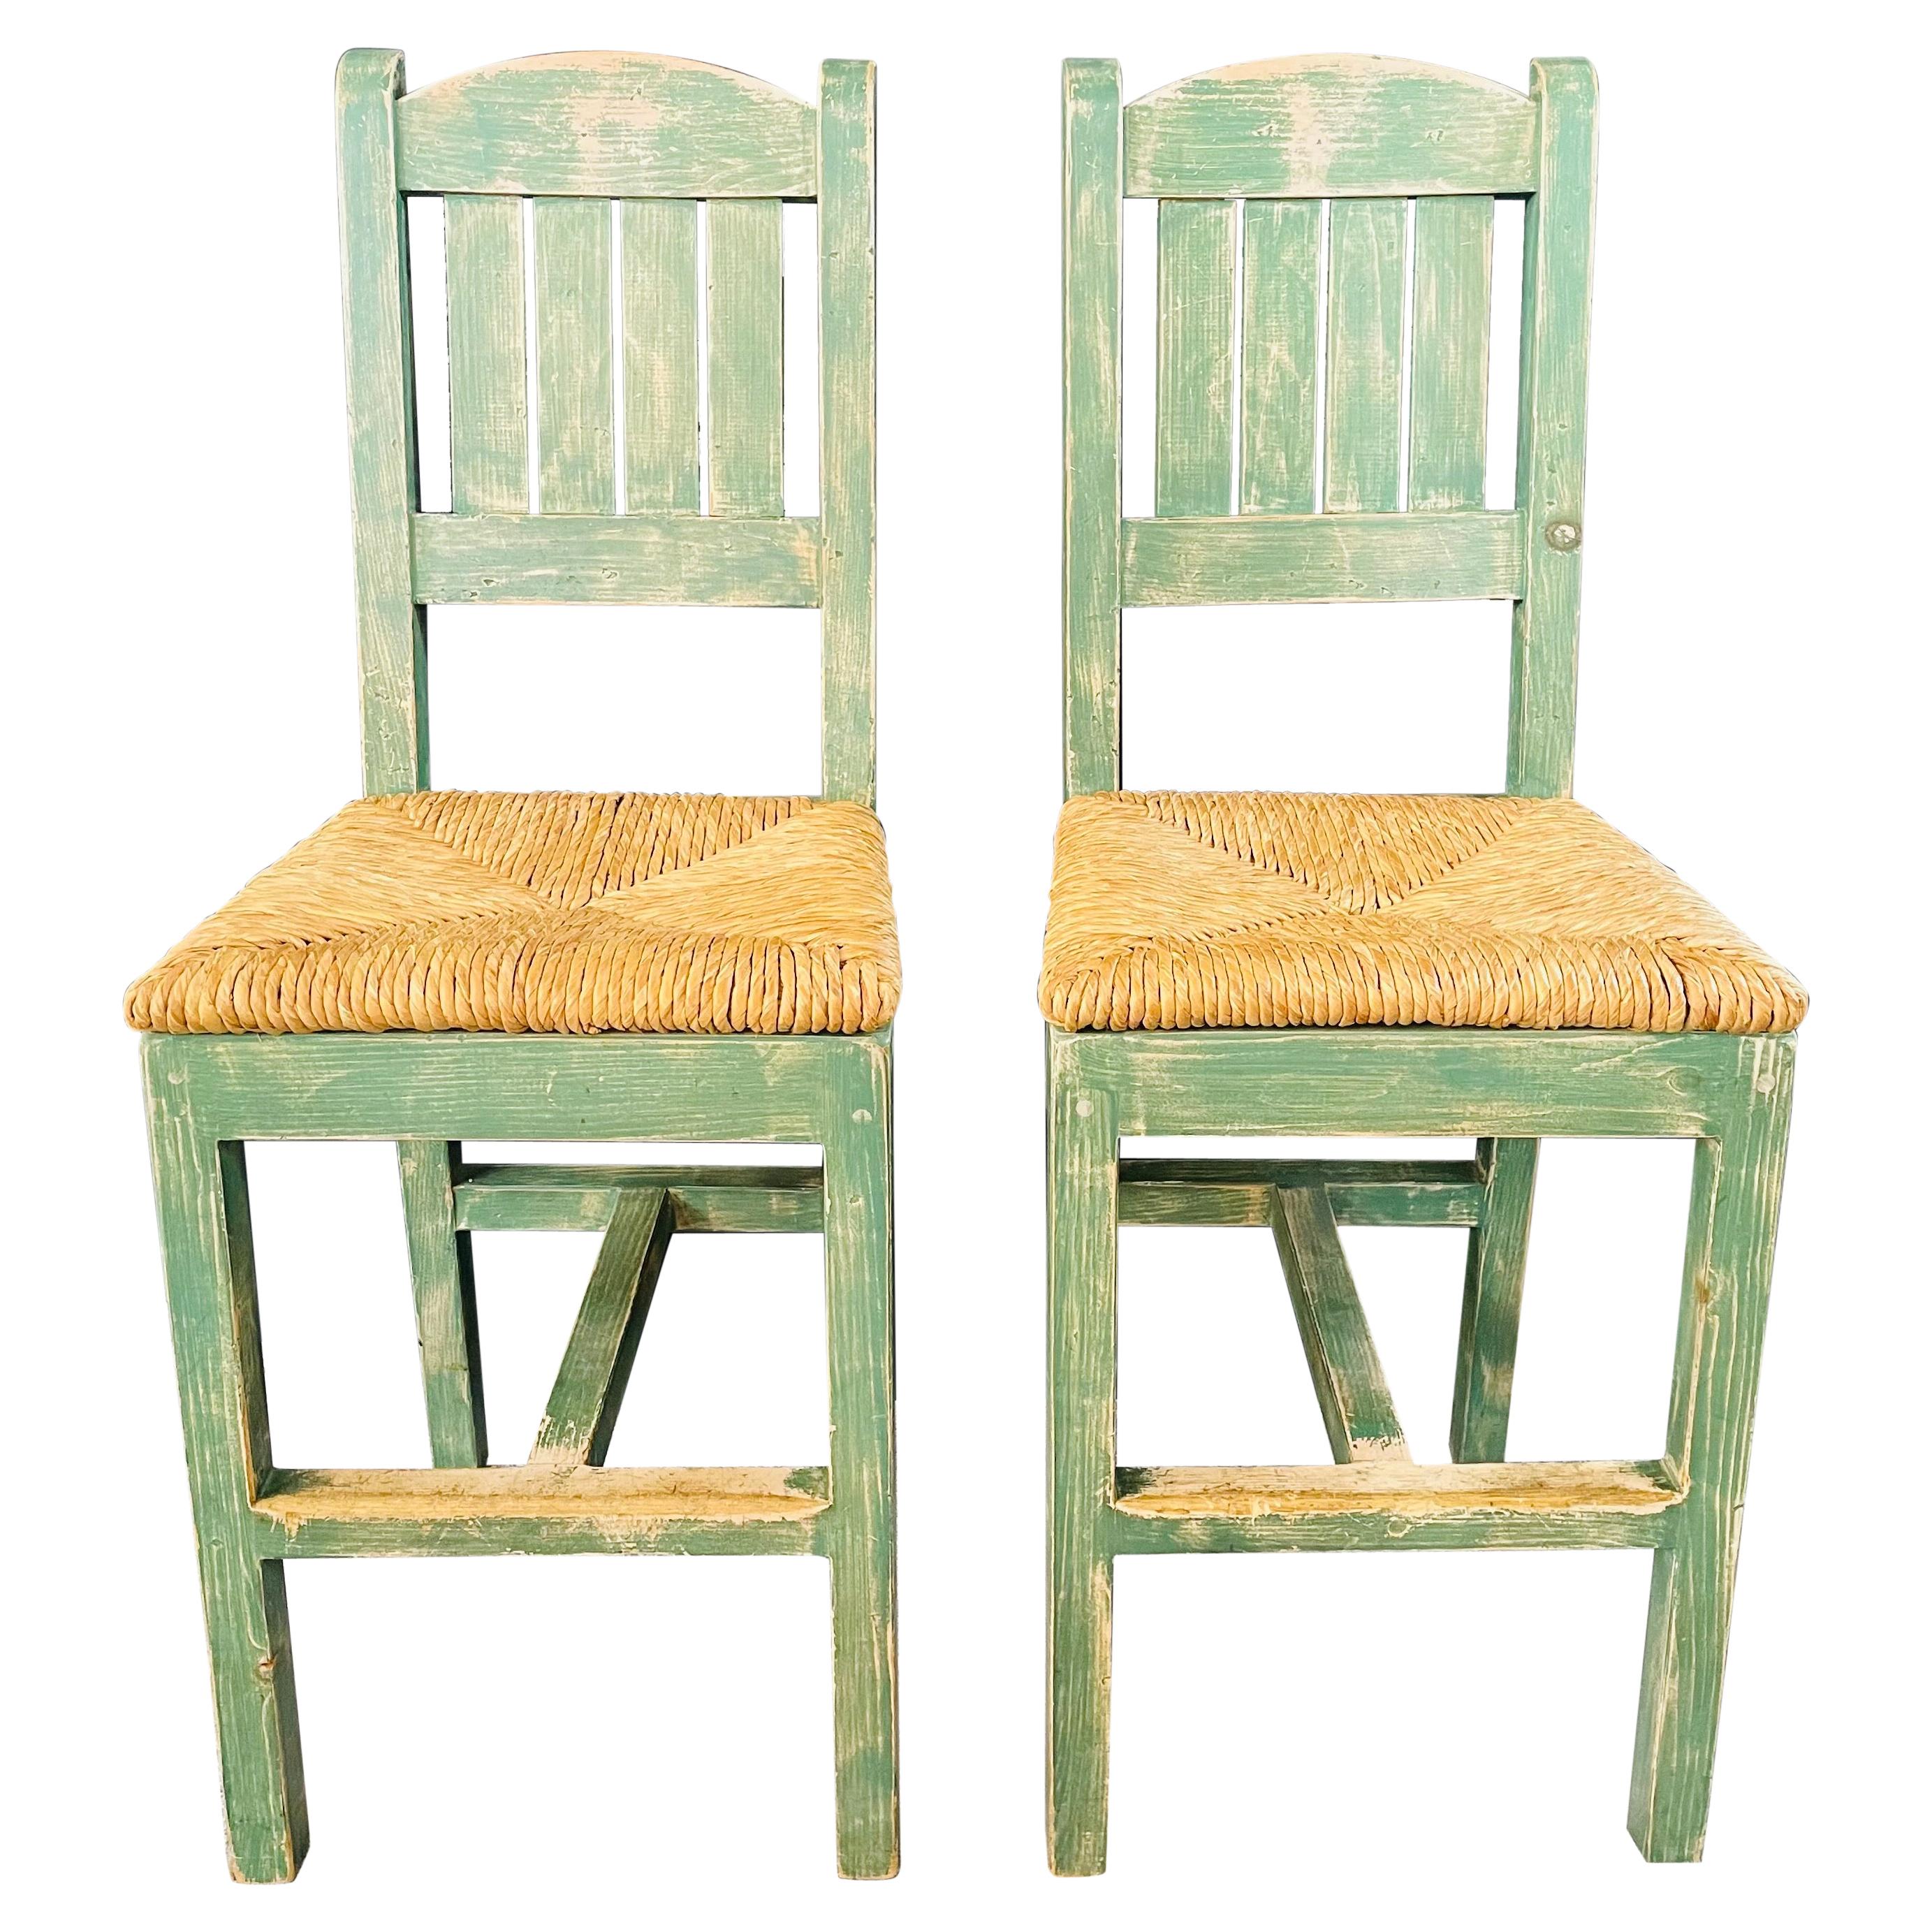 Vintage French Rustic Syle Straw Wooden Bar Stool in Green Turquoise, a Pair